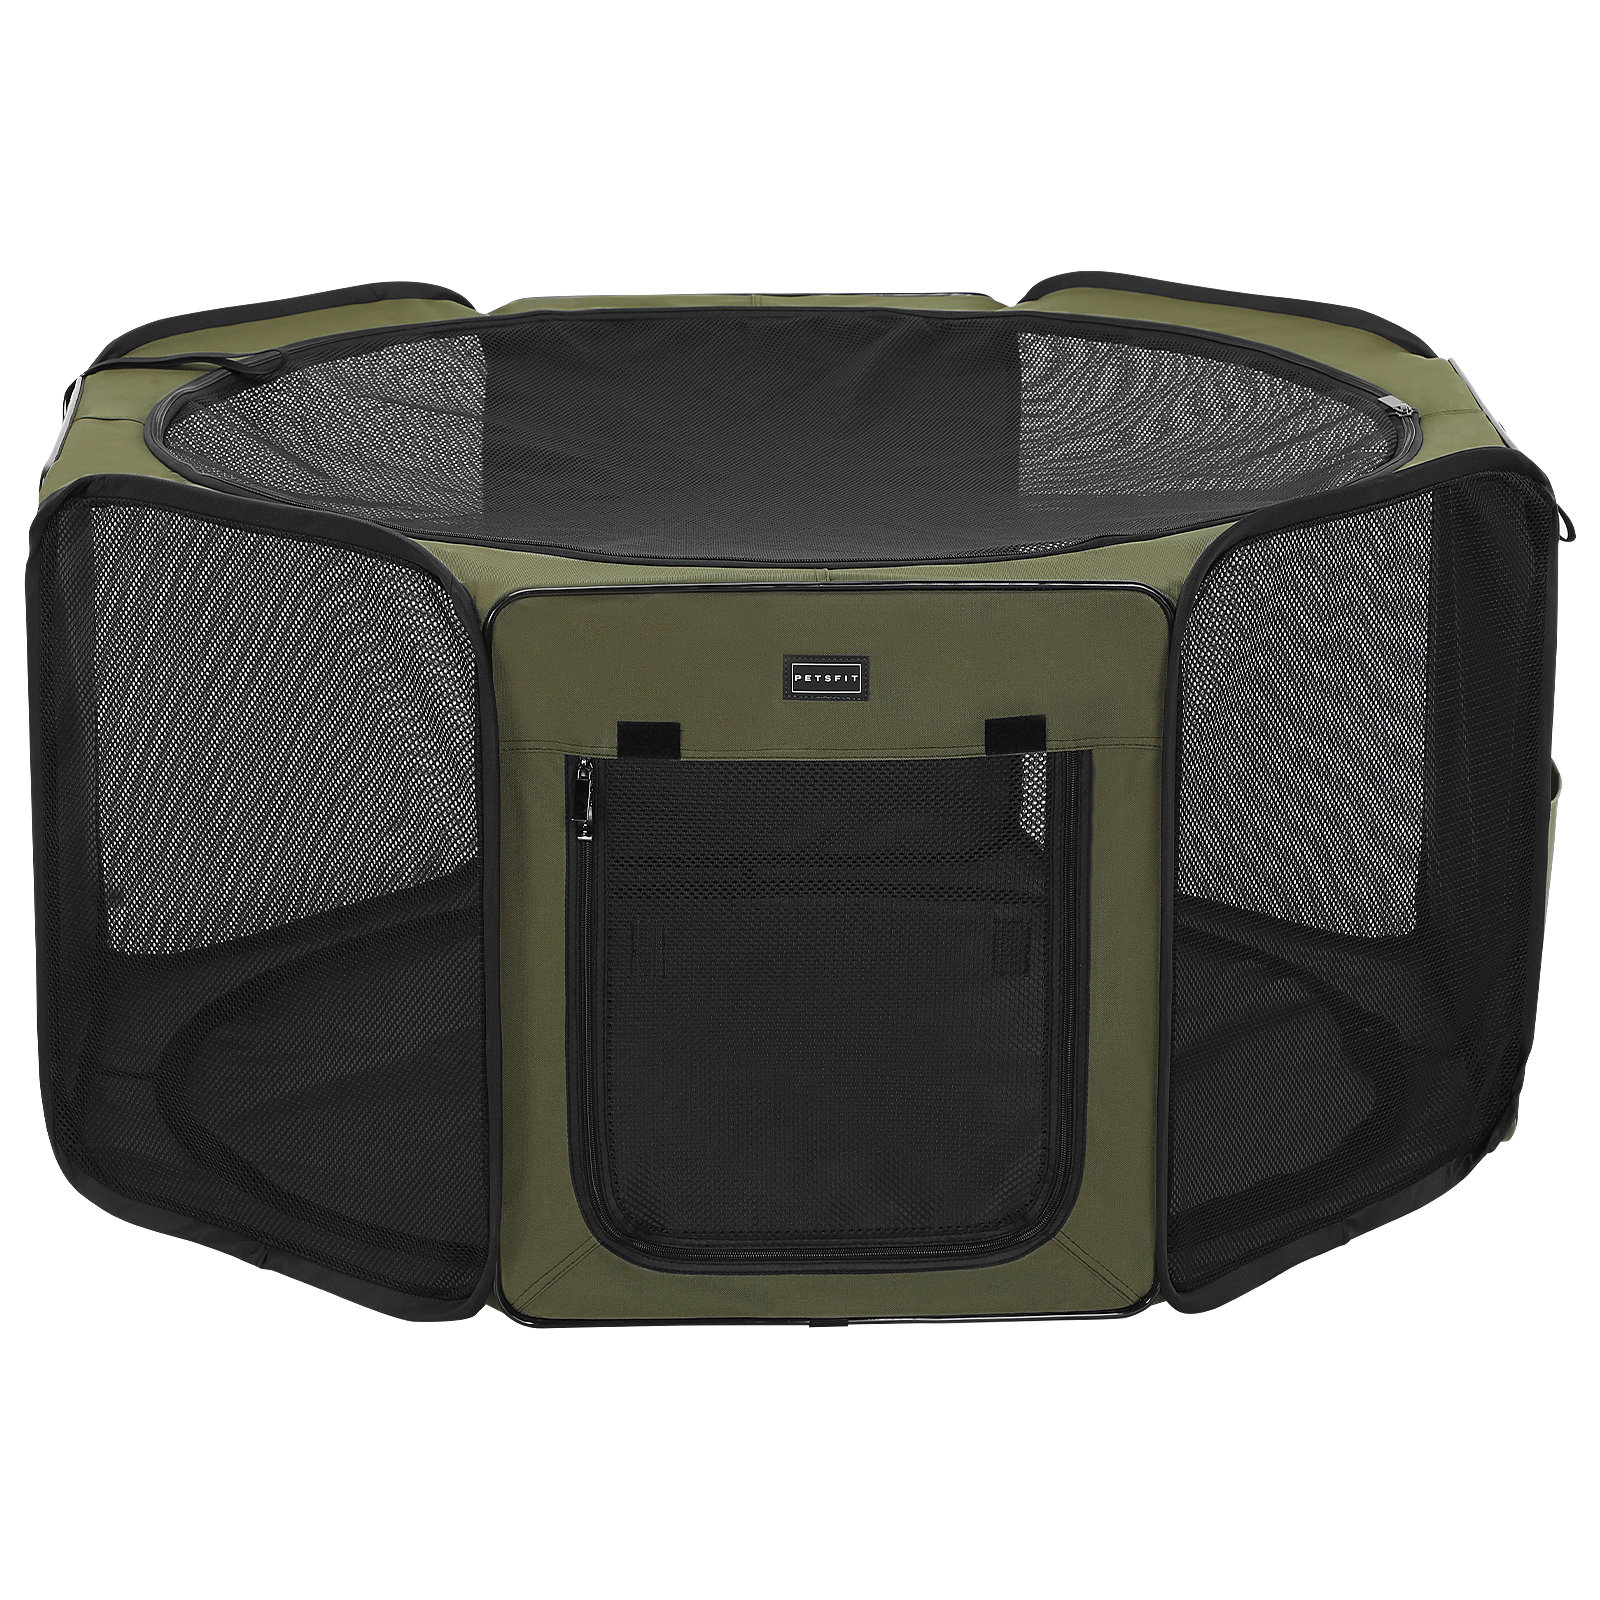 Petsfit Collapsible Soft-Sided Crate with 1 Door